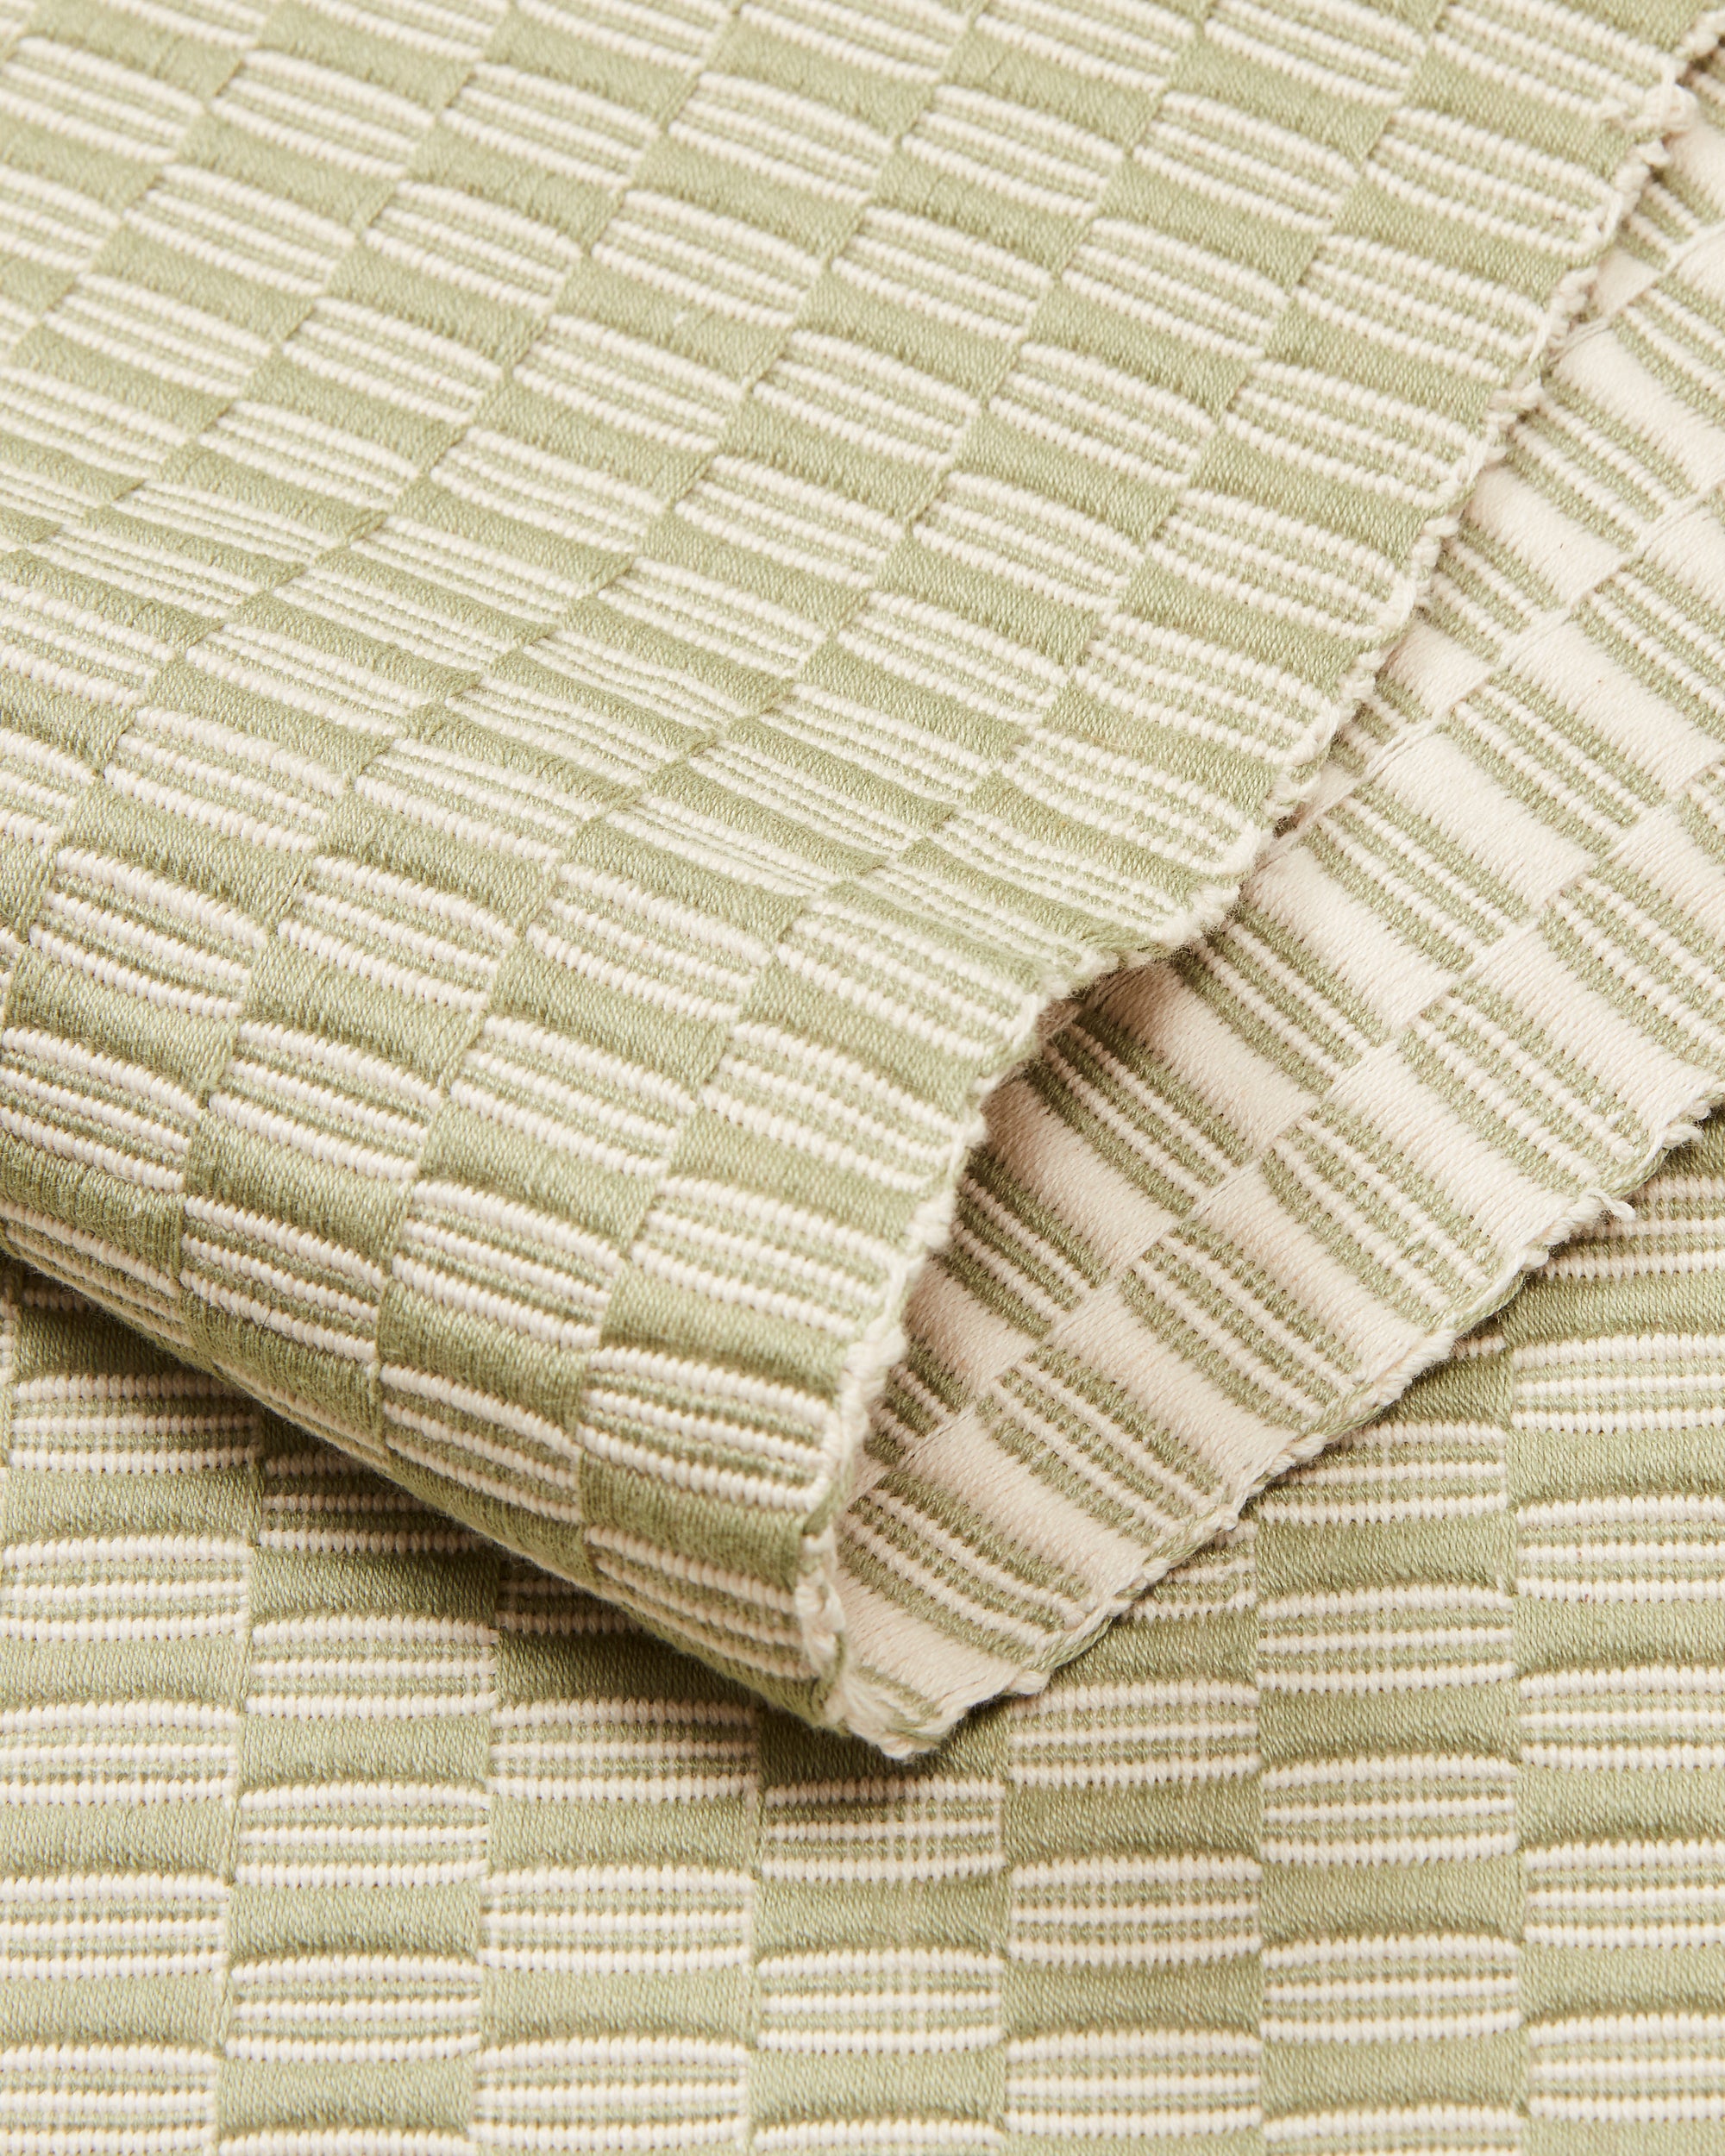 close-up detail ethically handwoven cotton table runner sage green